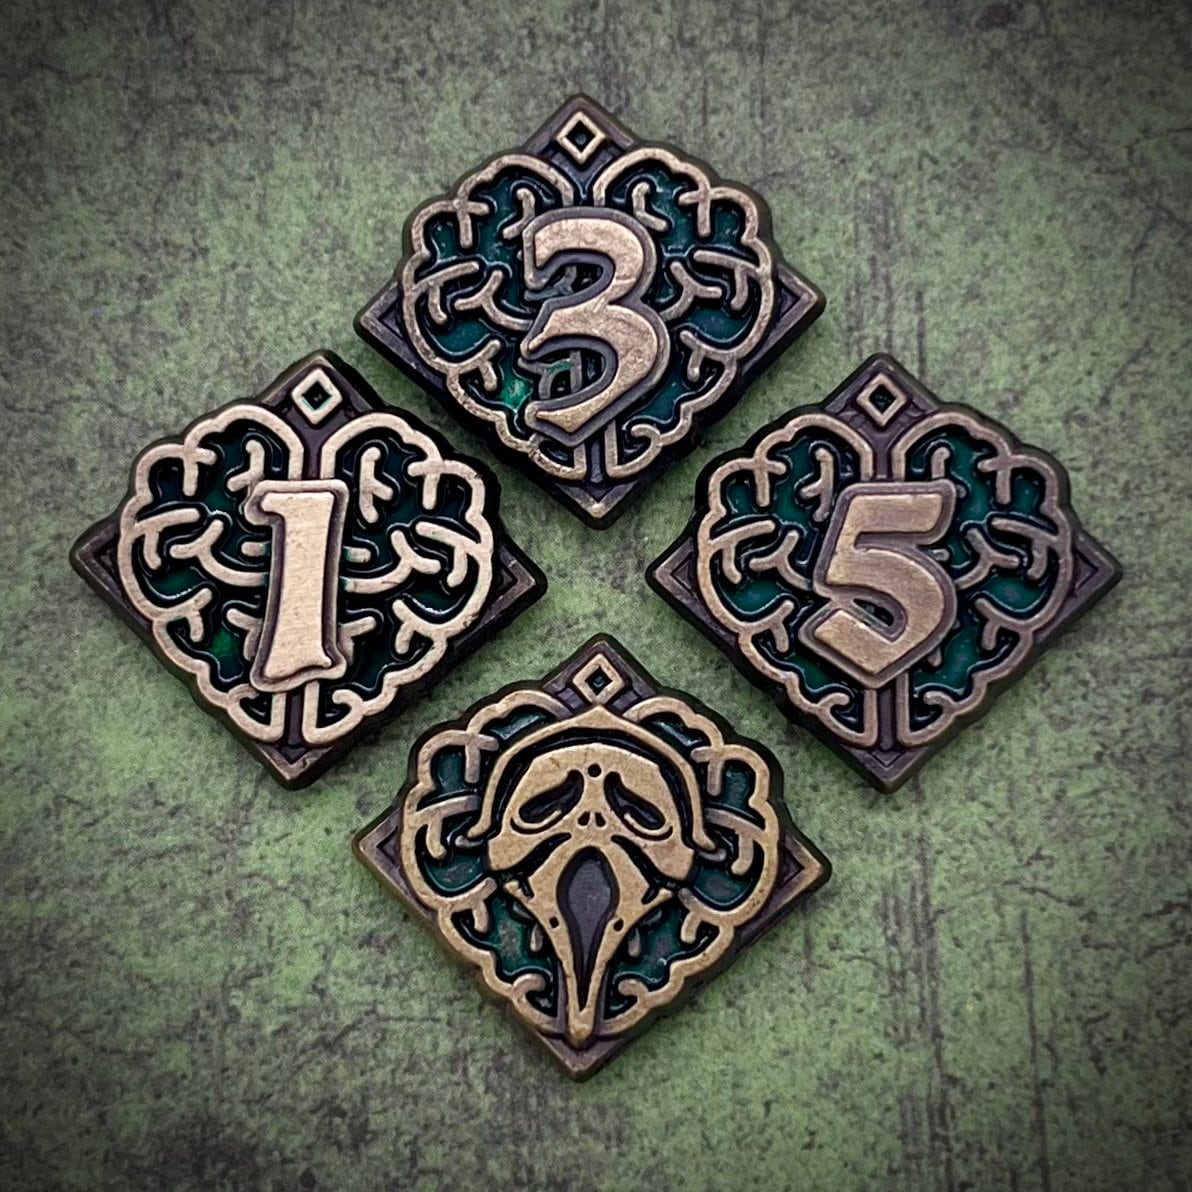 Health Sanity Resource Clue Doom Tokens Set for Arkham Horror LCG (double-sided, metal, 20mm in diameter)